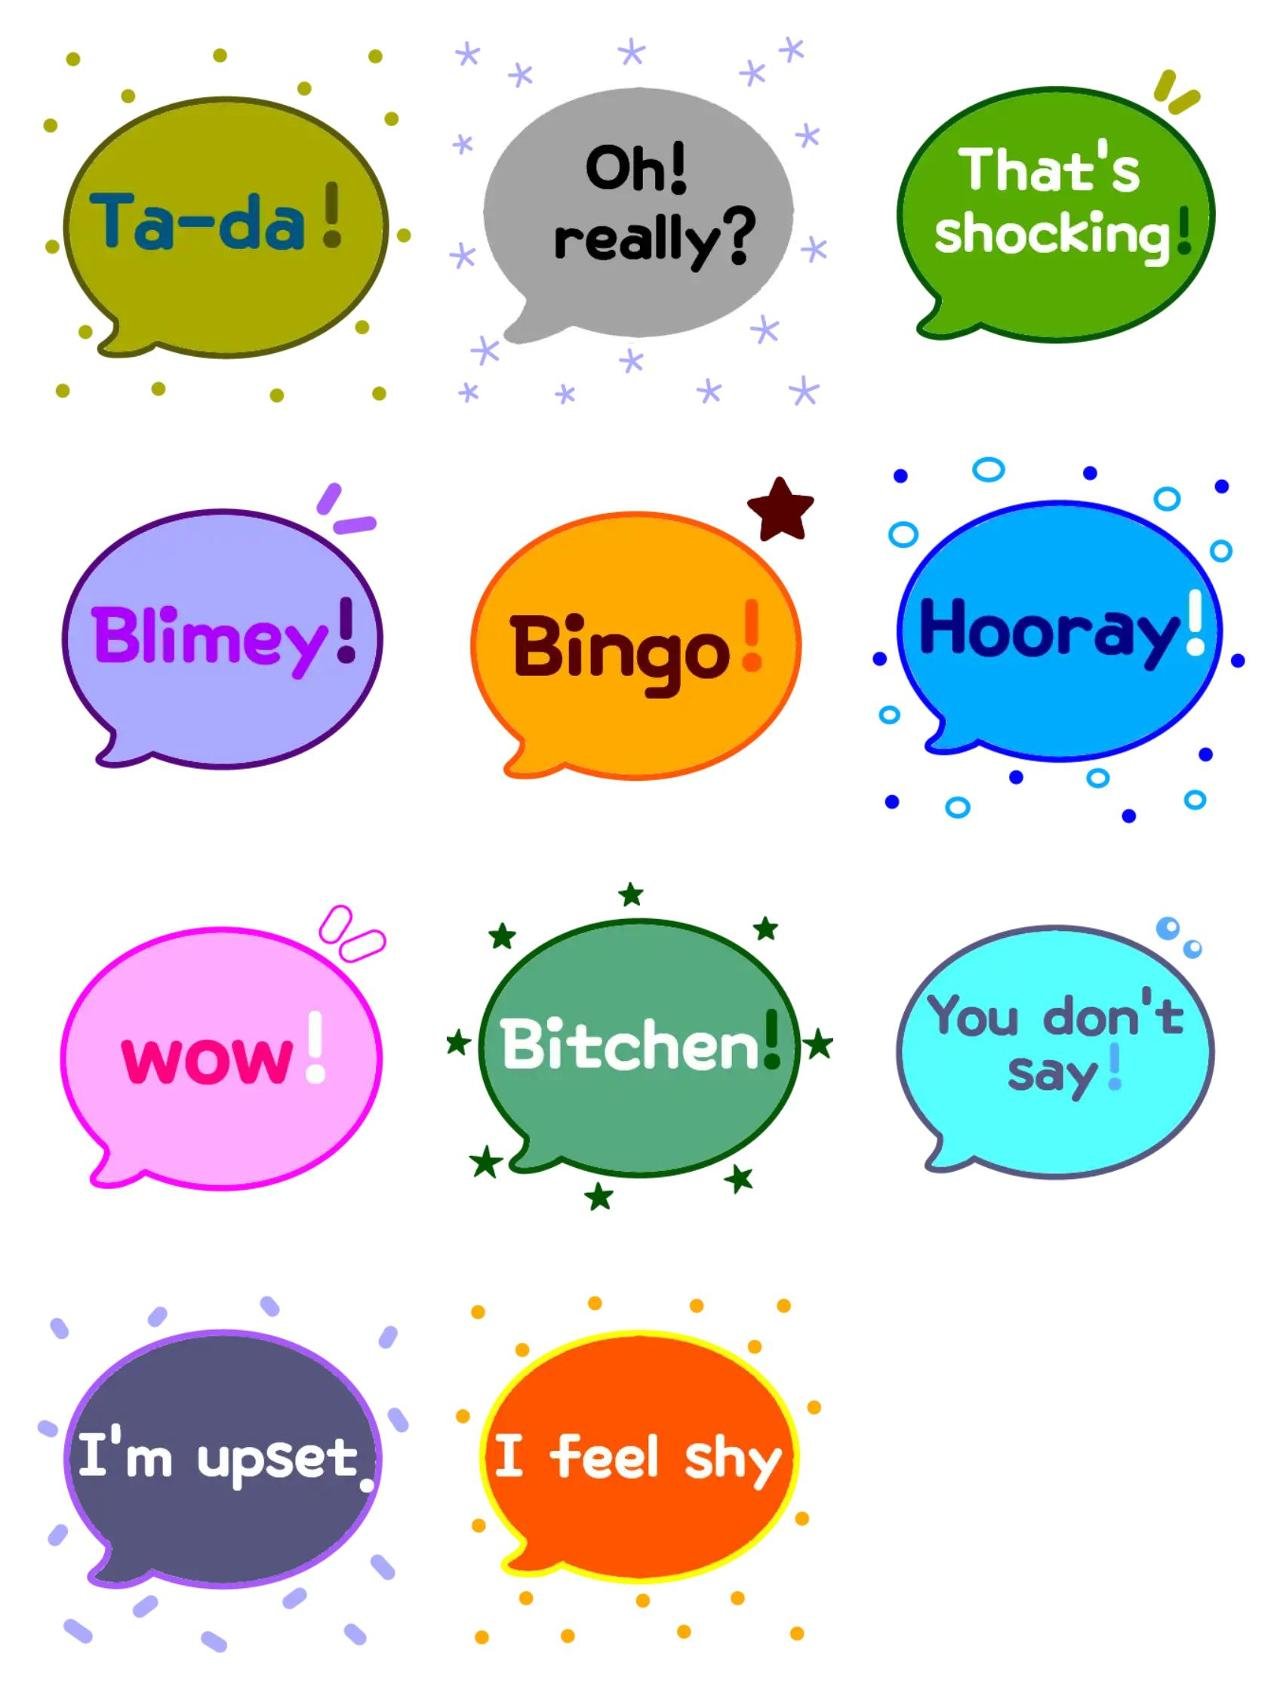 Bitchen! Celebrity,Phrases sticker pack for Whatsapp, Telegram, Signal, and others chatting and message apps